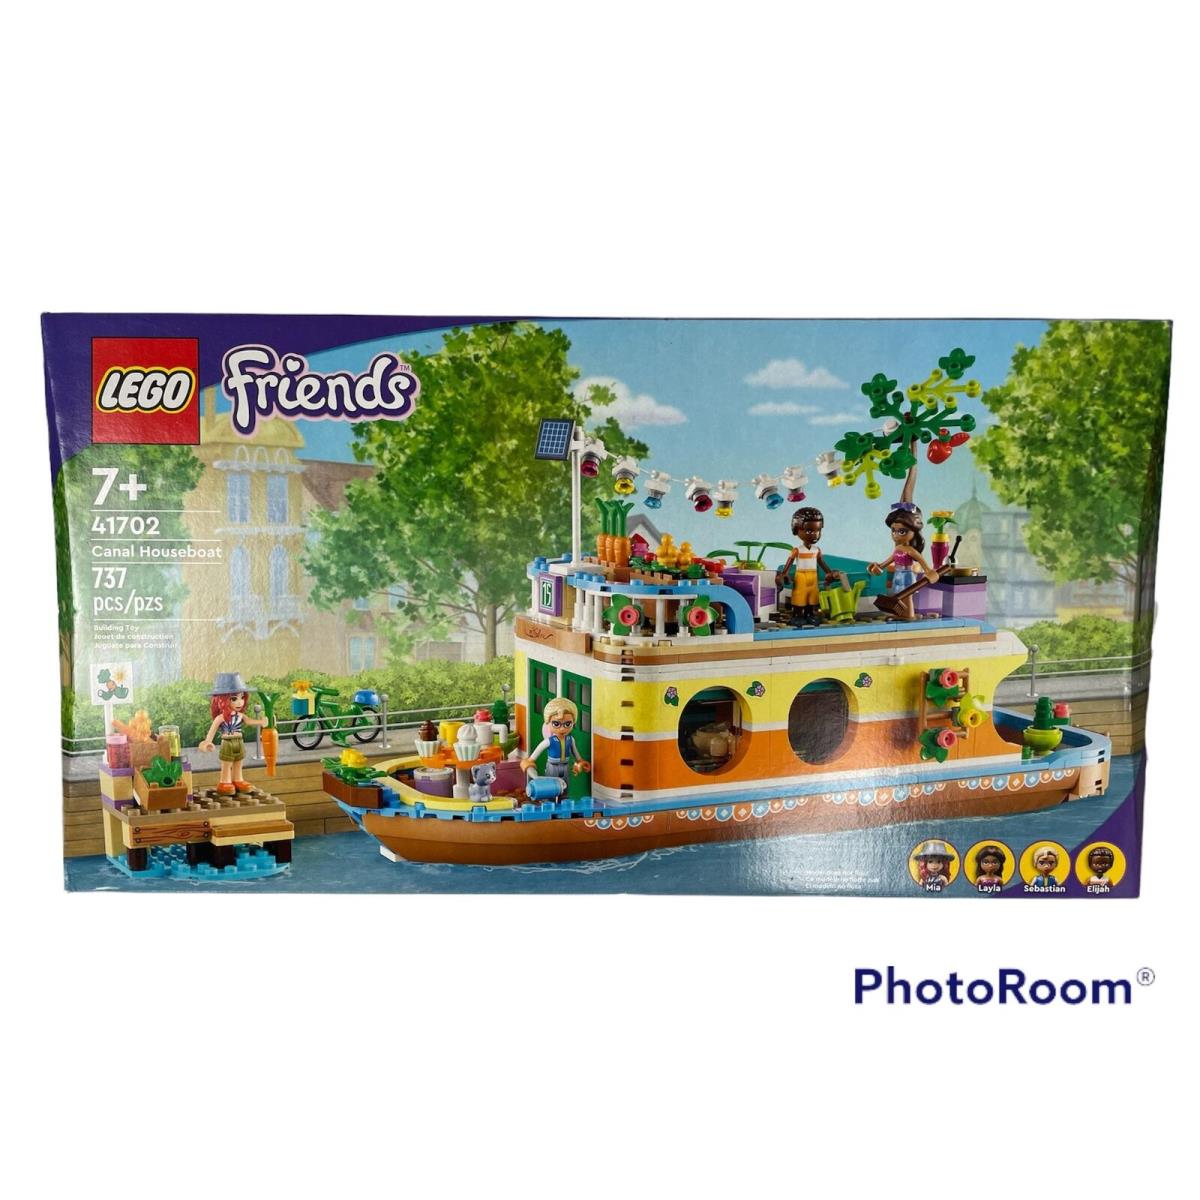 Lego Friends Canal Houseboat 41702 Age 7+